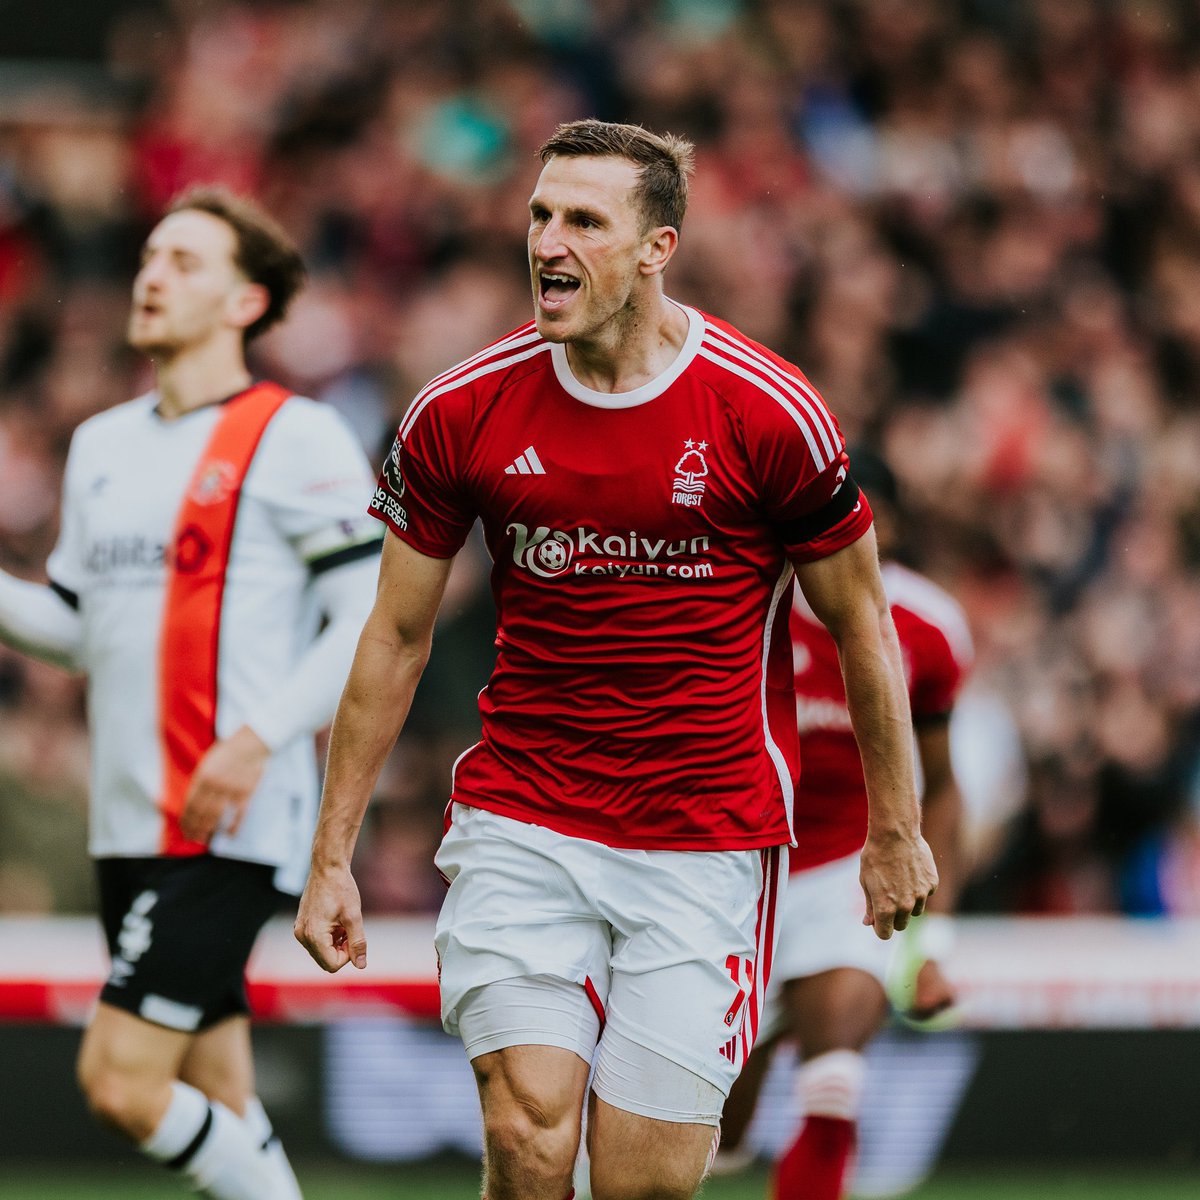 Chris Wood: 'I’m extremely happy with what I’ve achieved in the Premier League and I want to achieve more. There’s still so many goals I want to tick off and hopefully I can do that.' 👀 #NFFC [@TeleFootball]